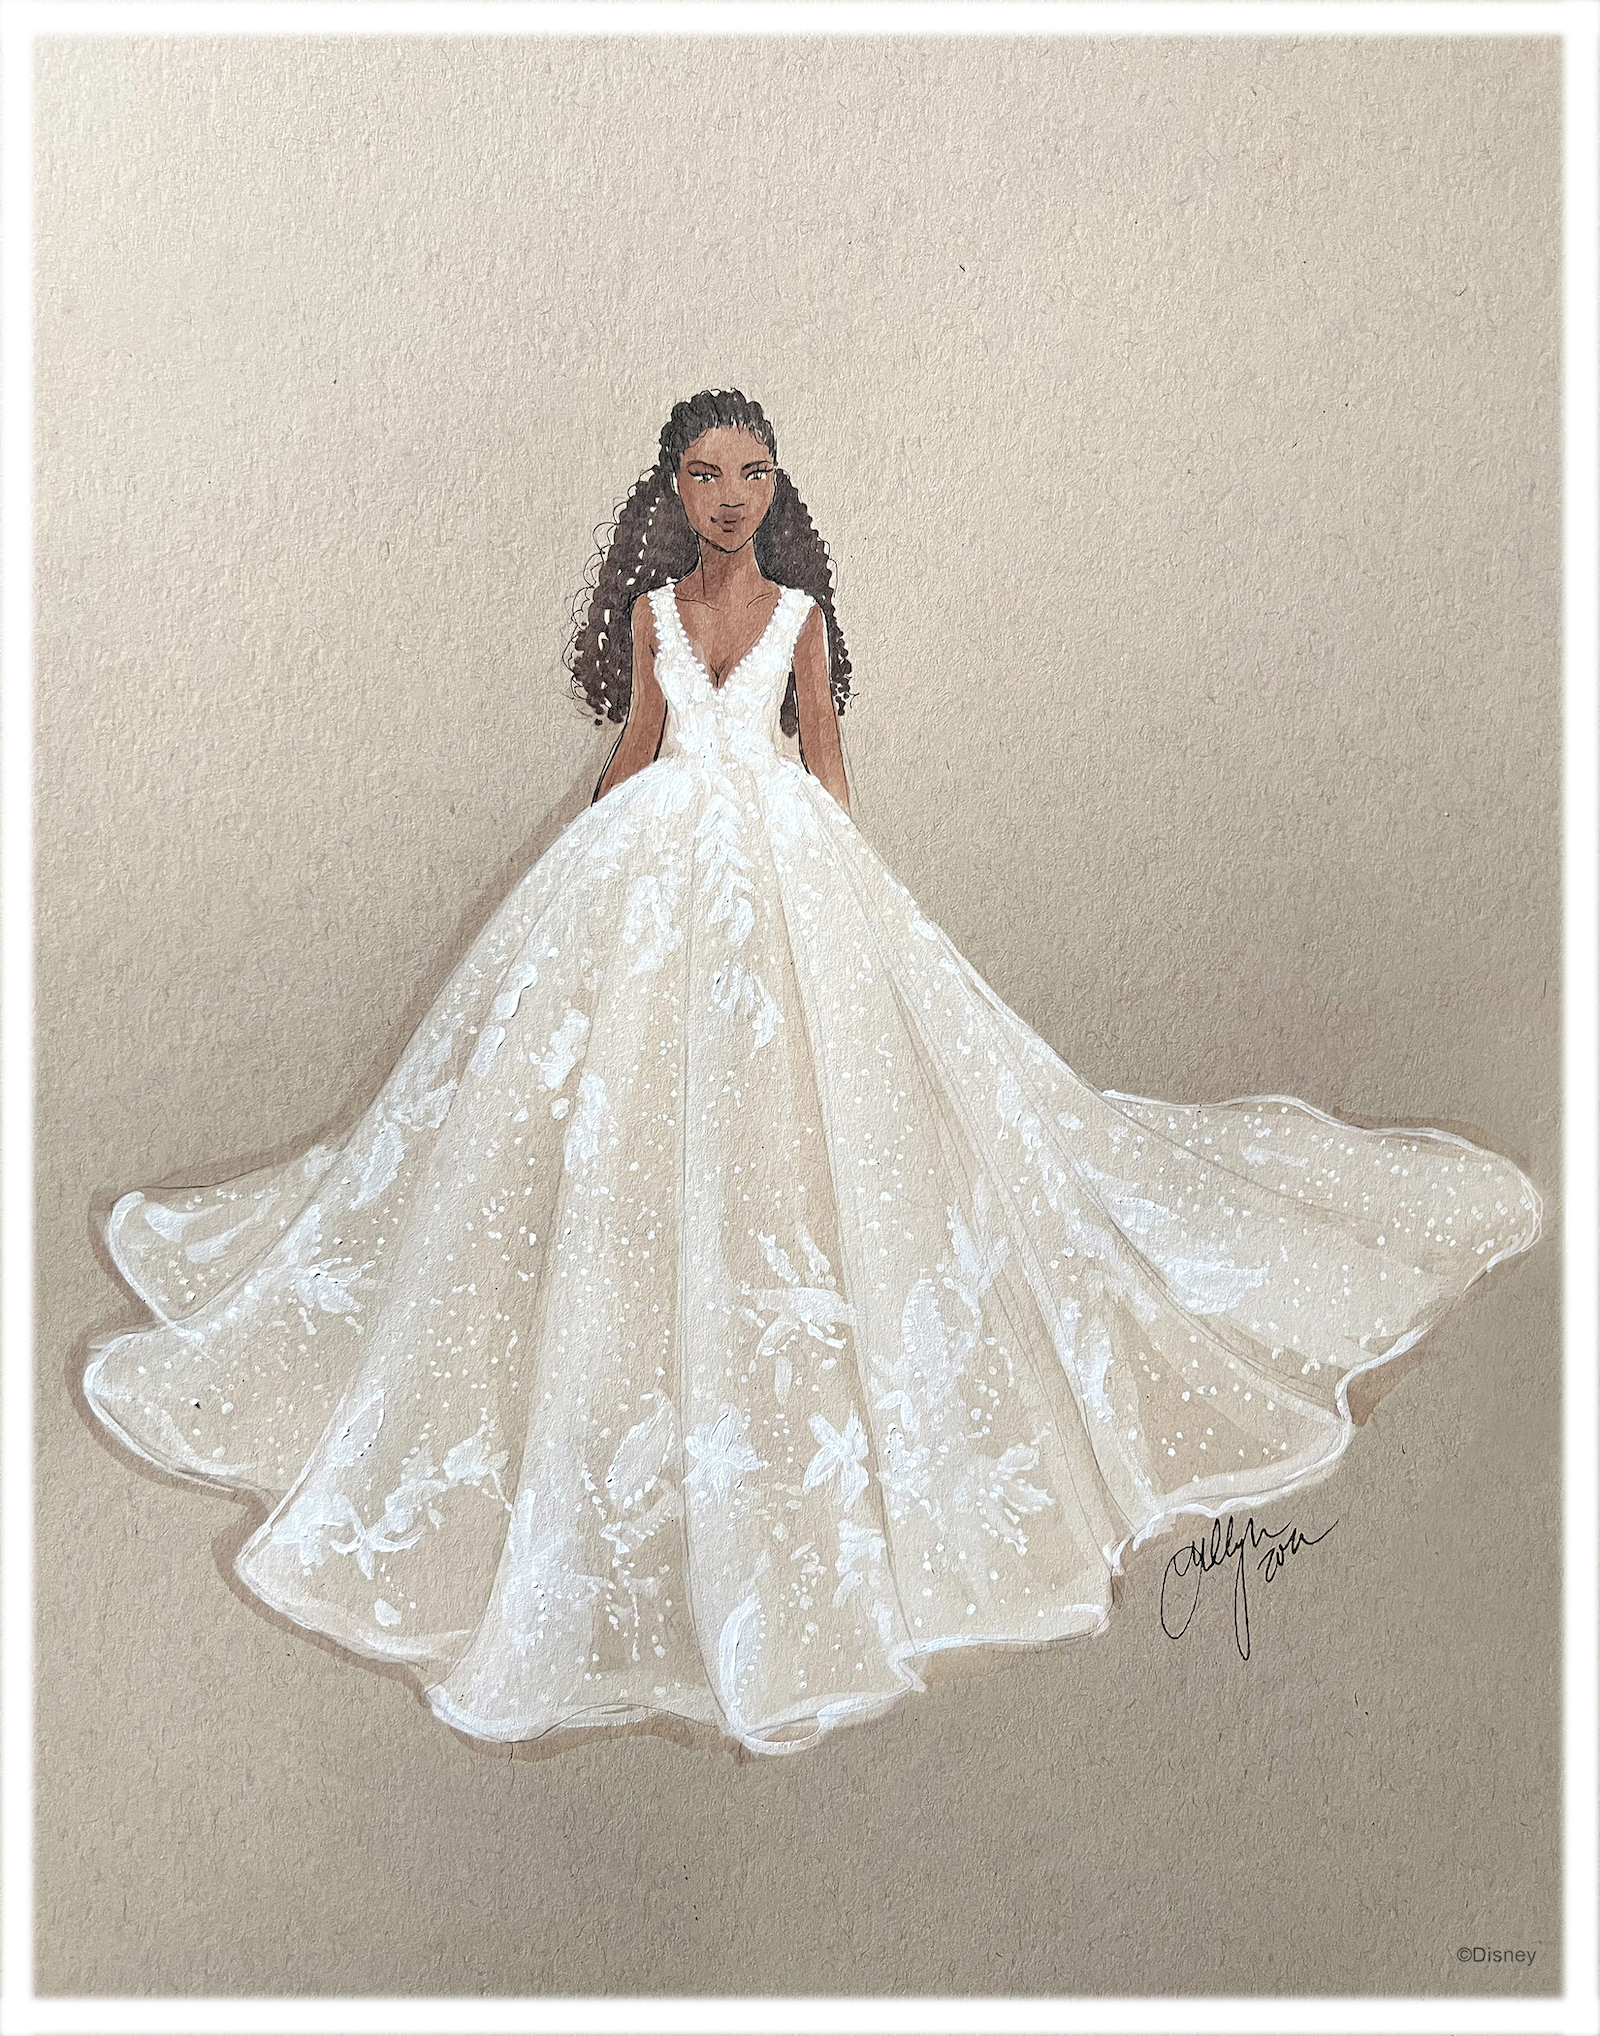 A sketch of a woman of color, hair half up and half down, in the Tiana DP358 2023 Disney Weddings dress that features a sleeveless lace top with a v cut that draws in at the waist and flows out generously at the bottom with sparkly material